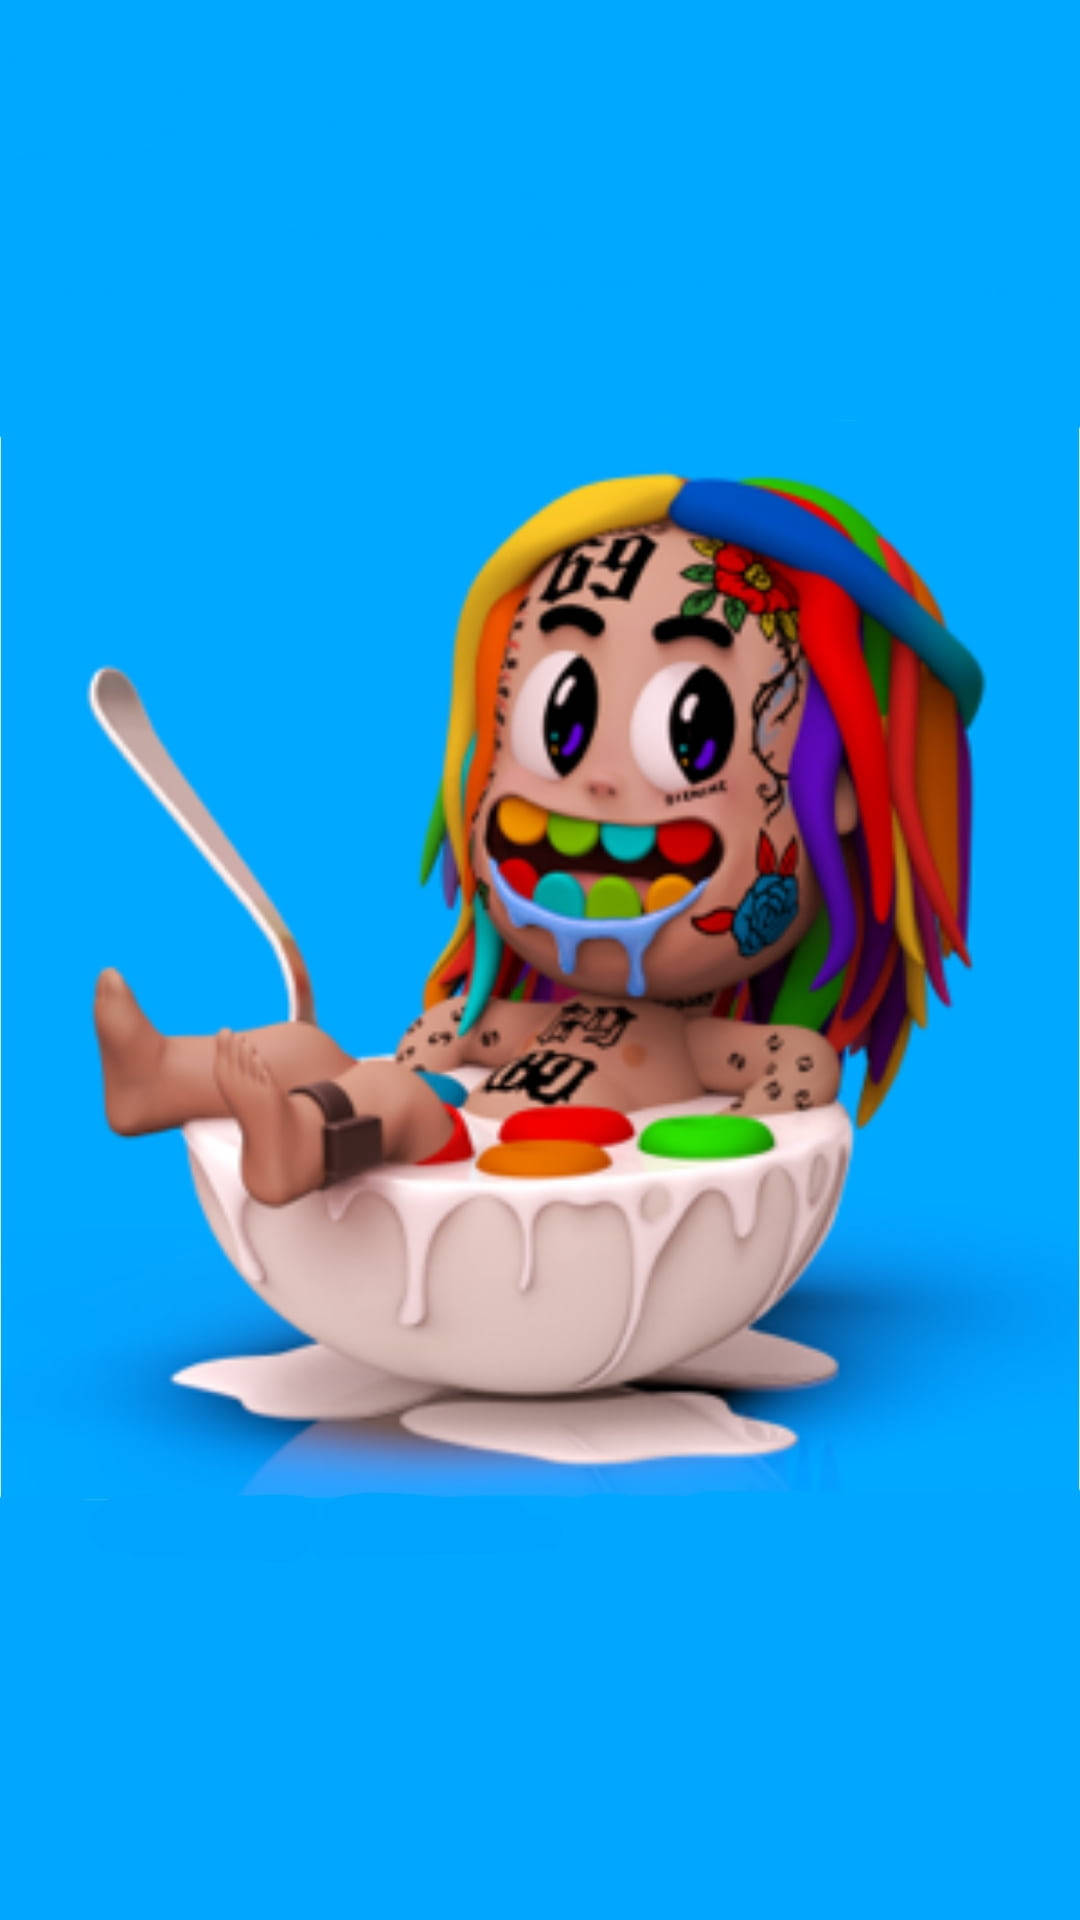 6ix9ine On A Bowl Of Cereal Art